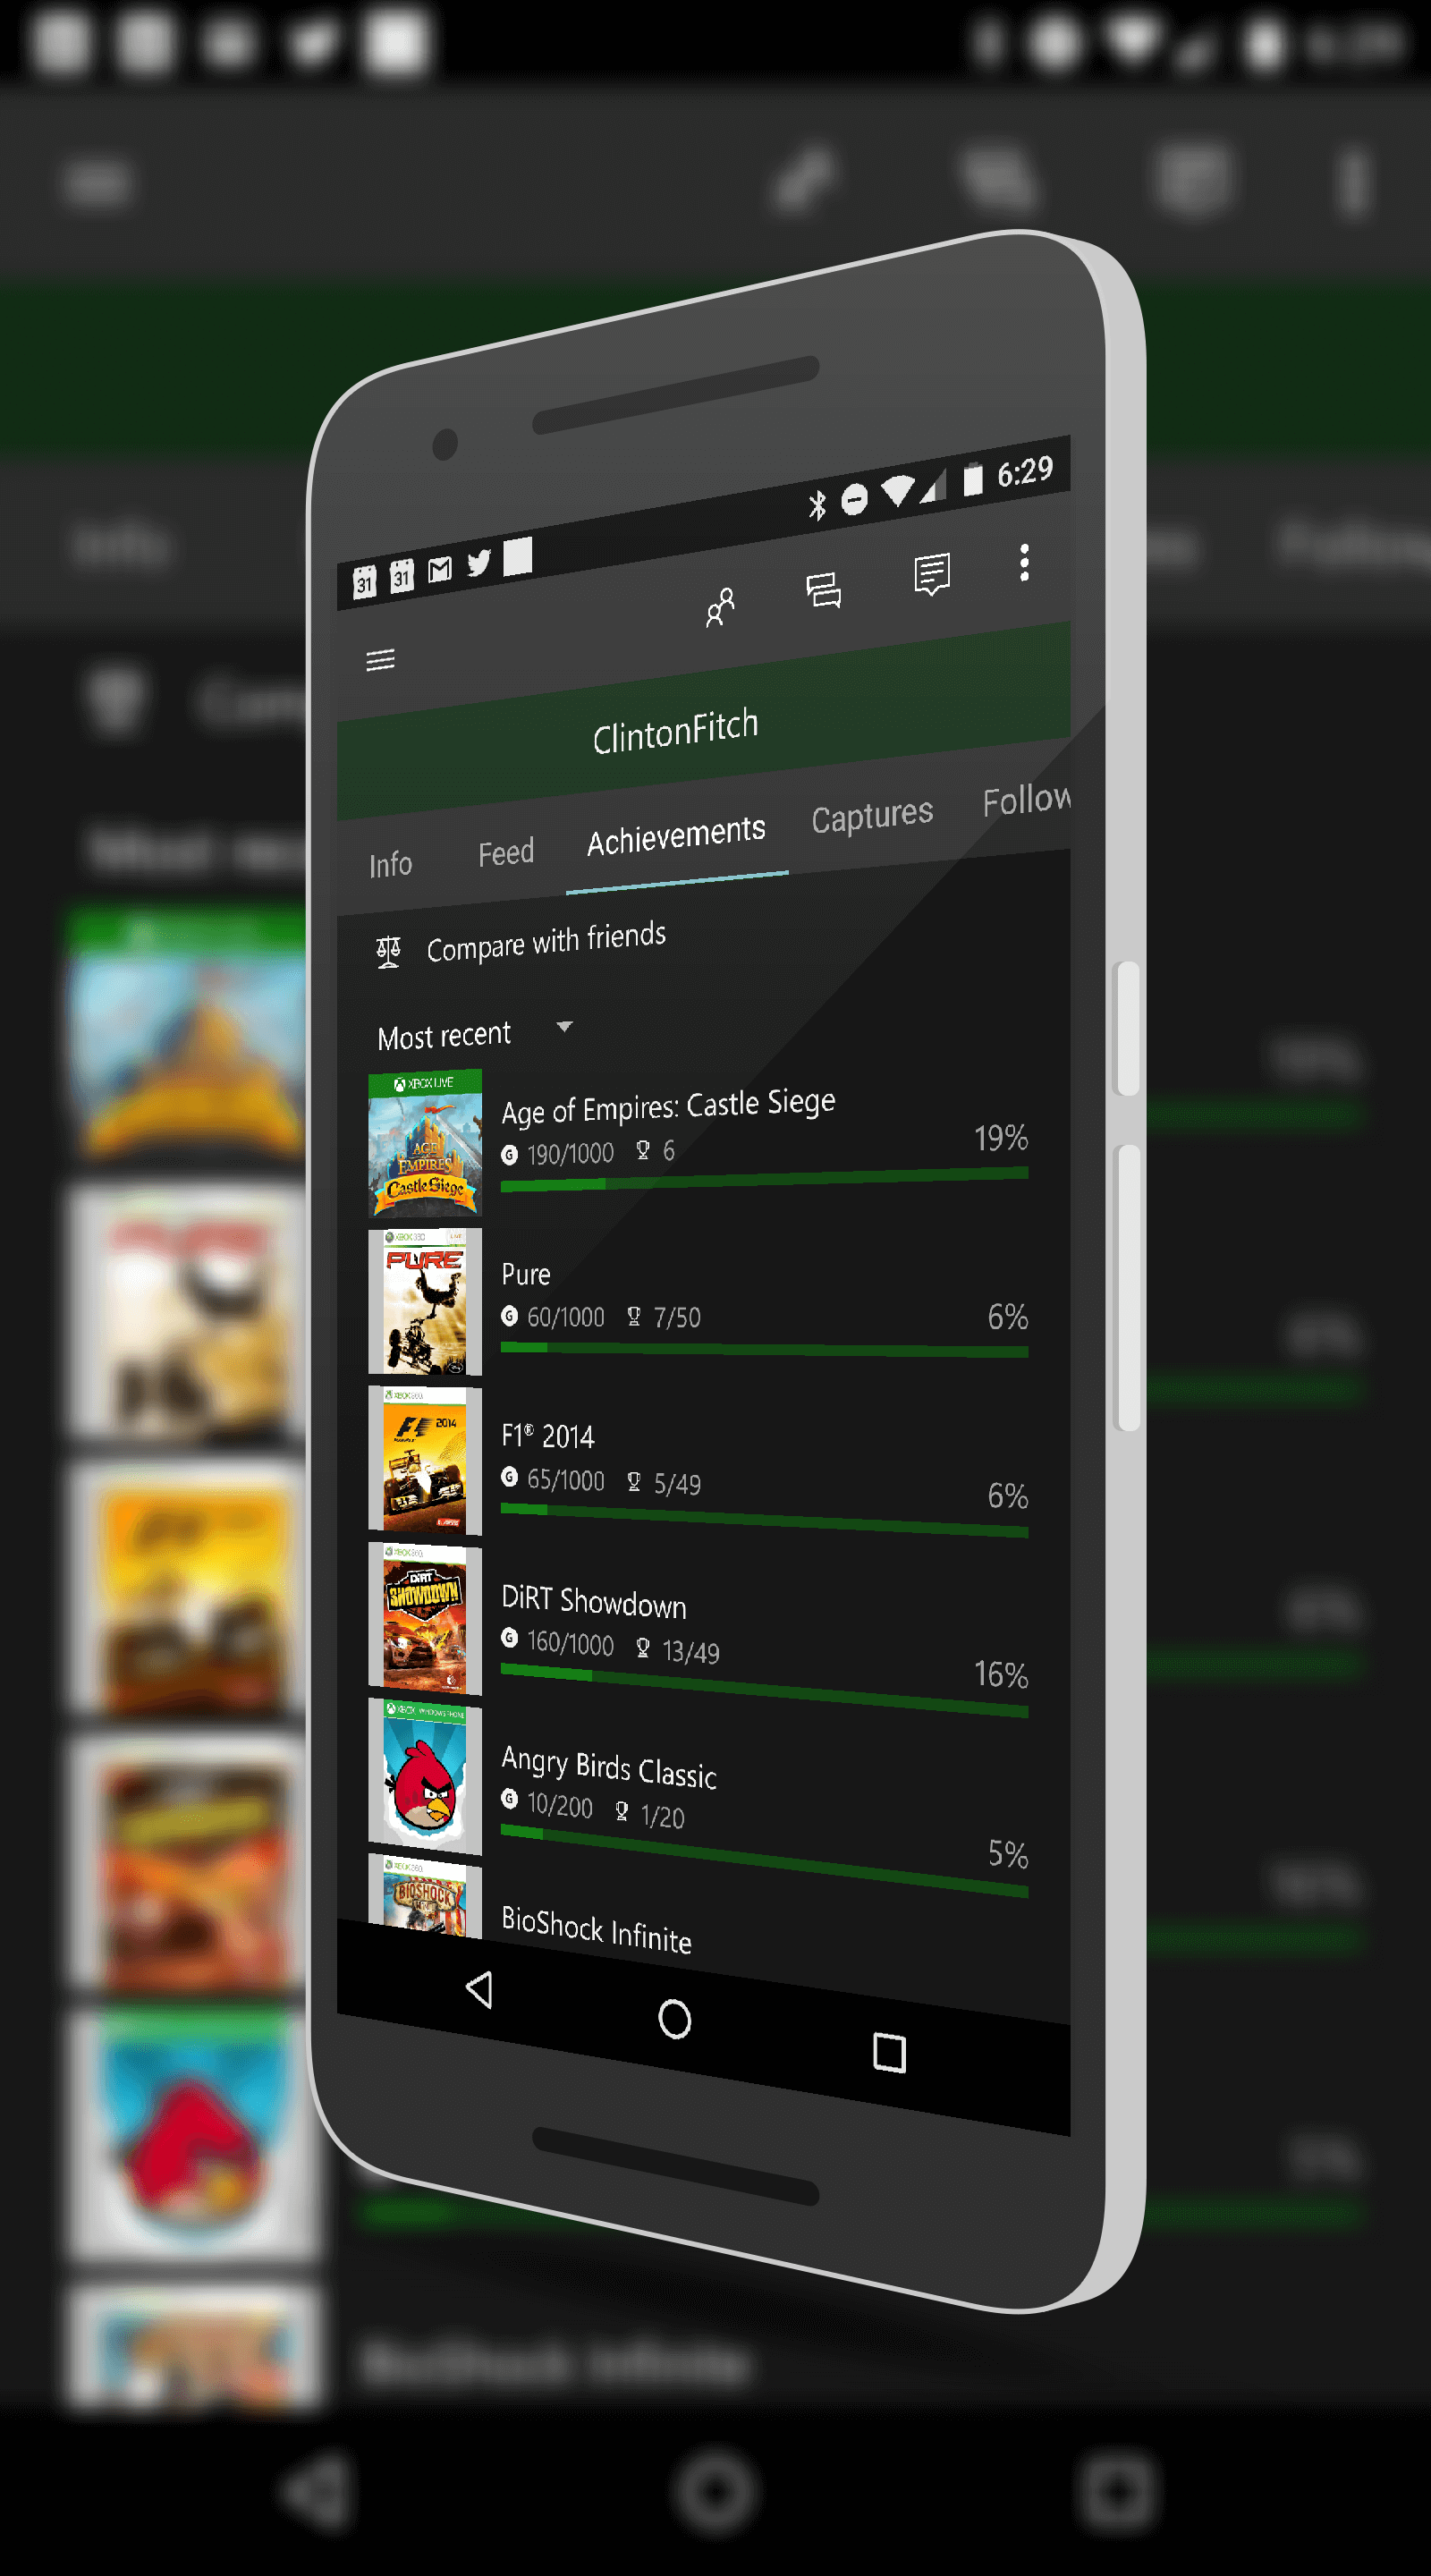 Microsoft Releases The Official Xbox App for Android – ClintonFitch.com